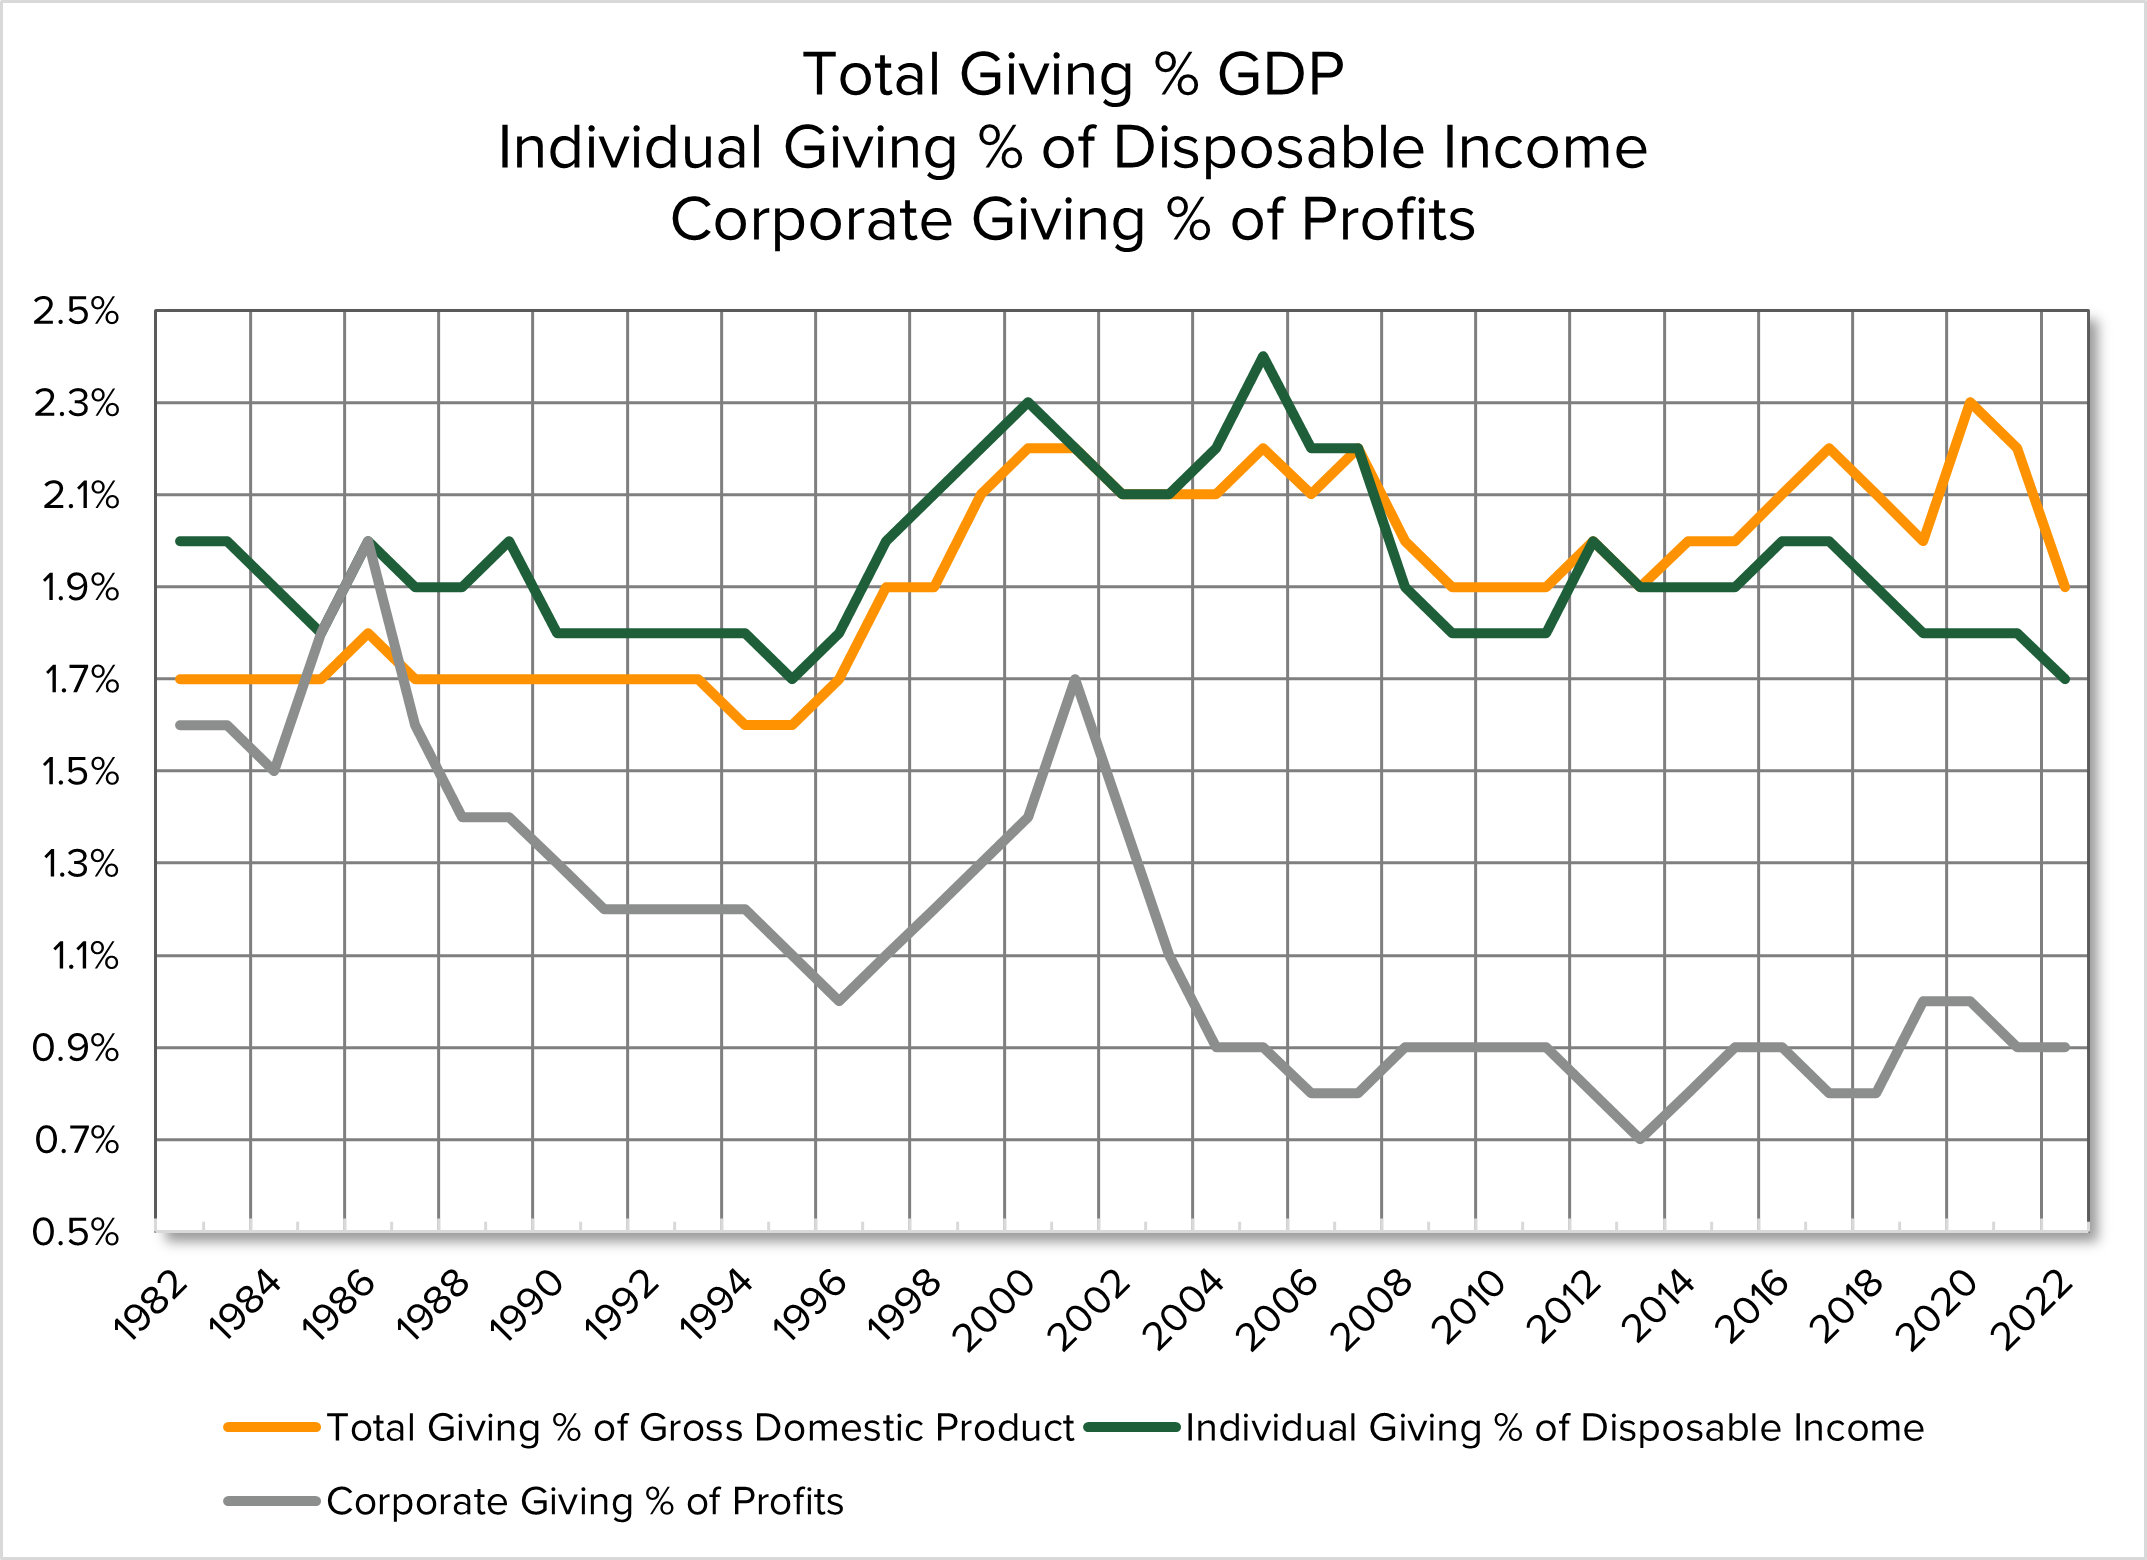 Total Giving as a % of GDP, Individual Giving as a % of Disposable Income, Corporate Giving as a % of Profits - shown in a line graph from 1982-2022